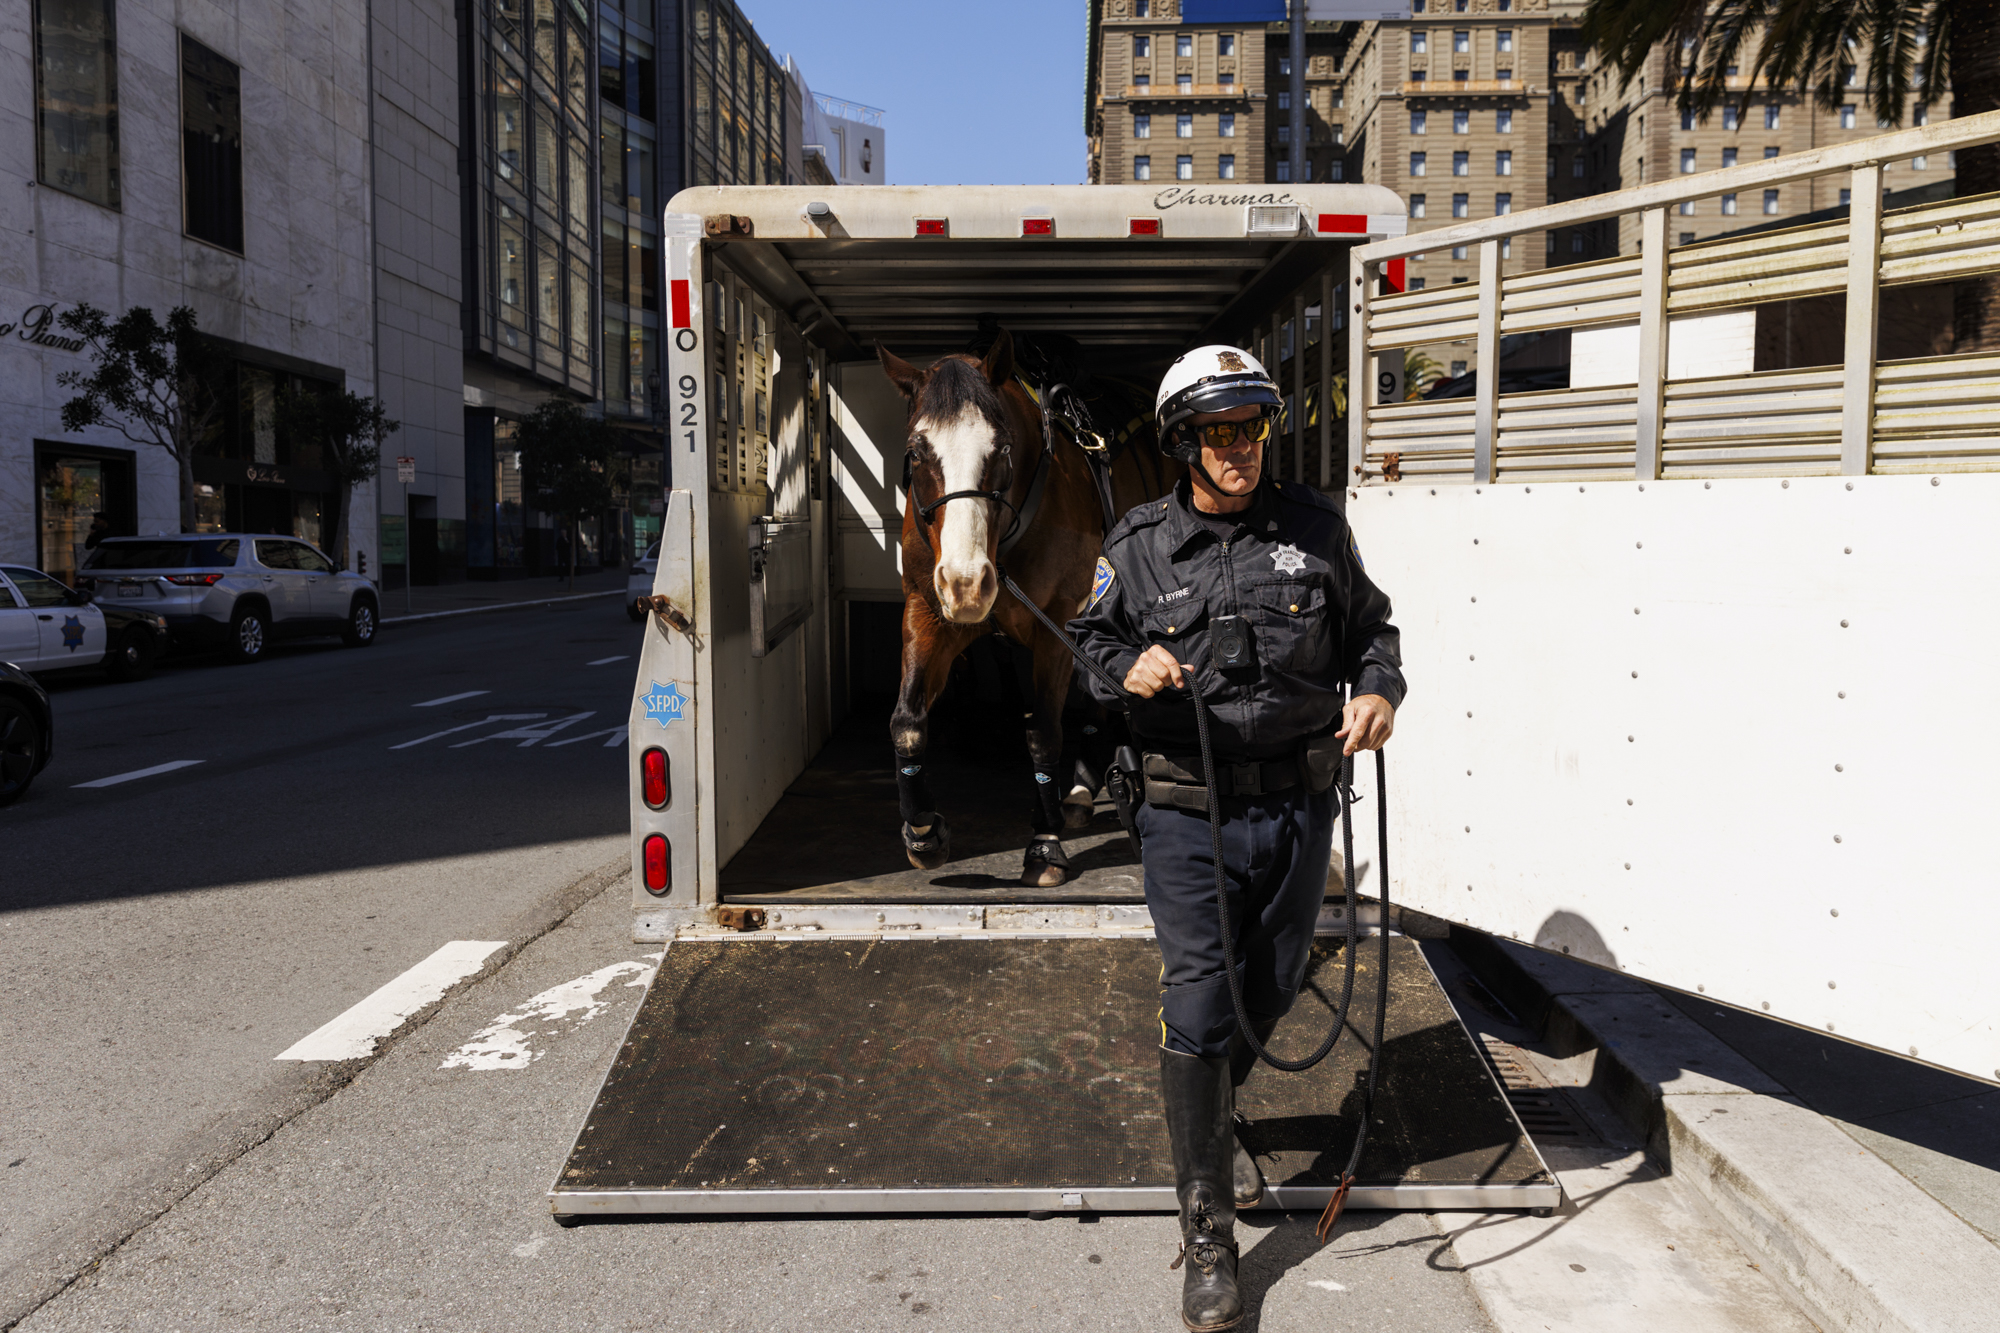 A police officer in uniform leads a horse out of a trailer in downtown San Francisco.